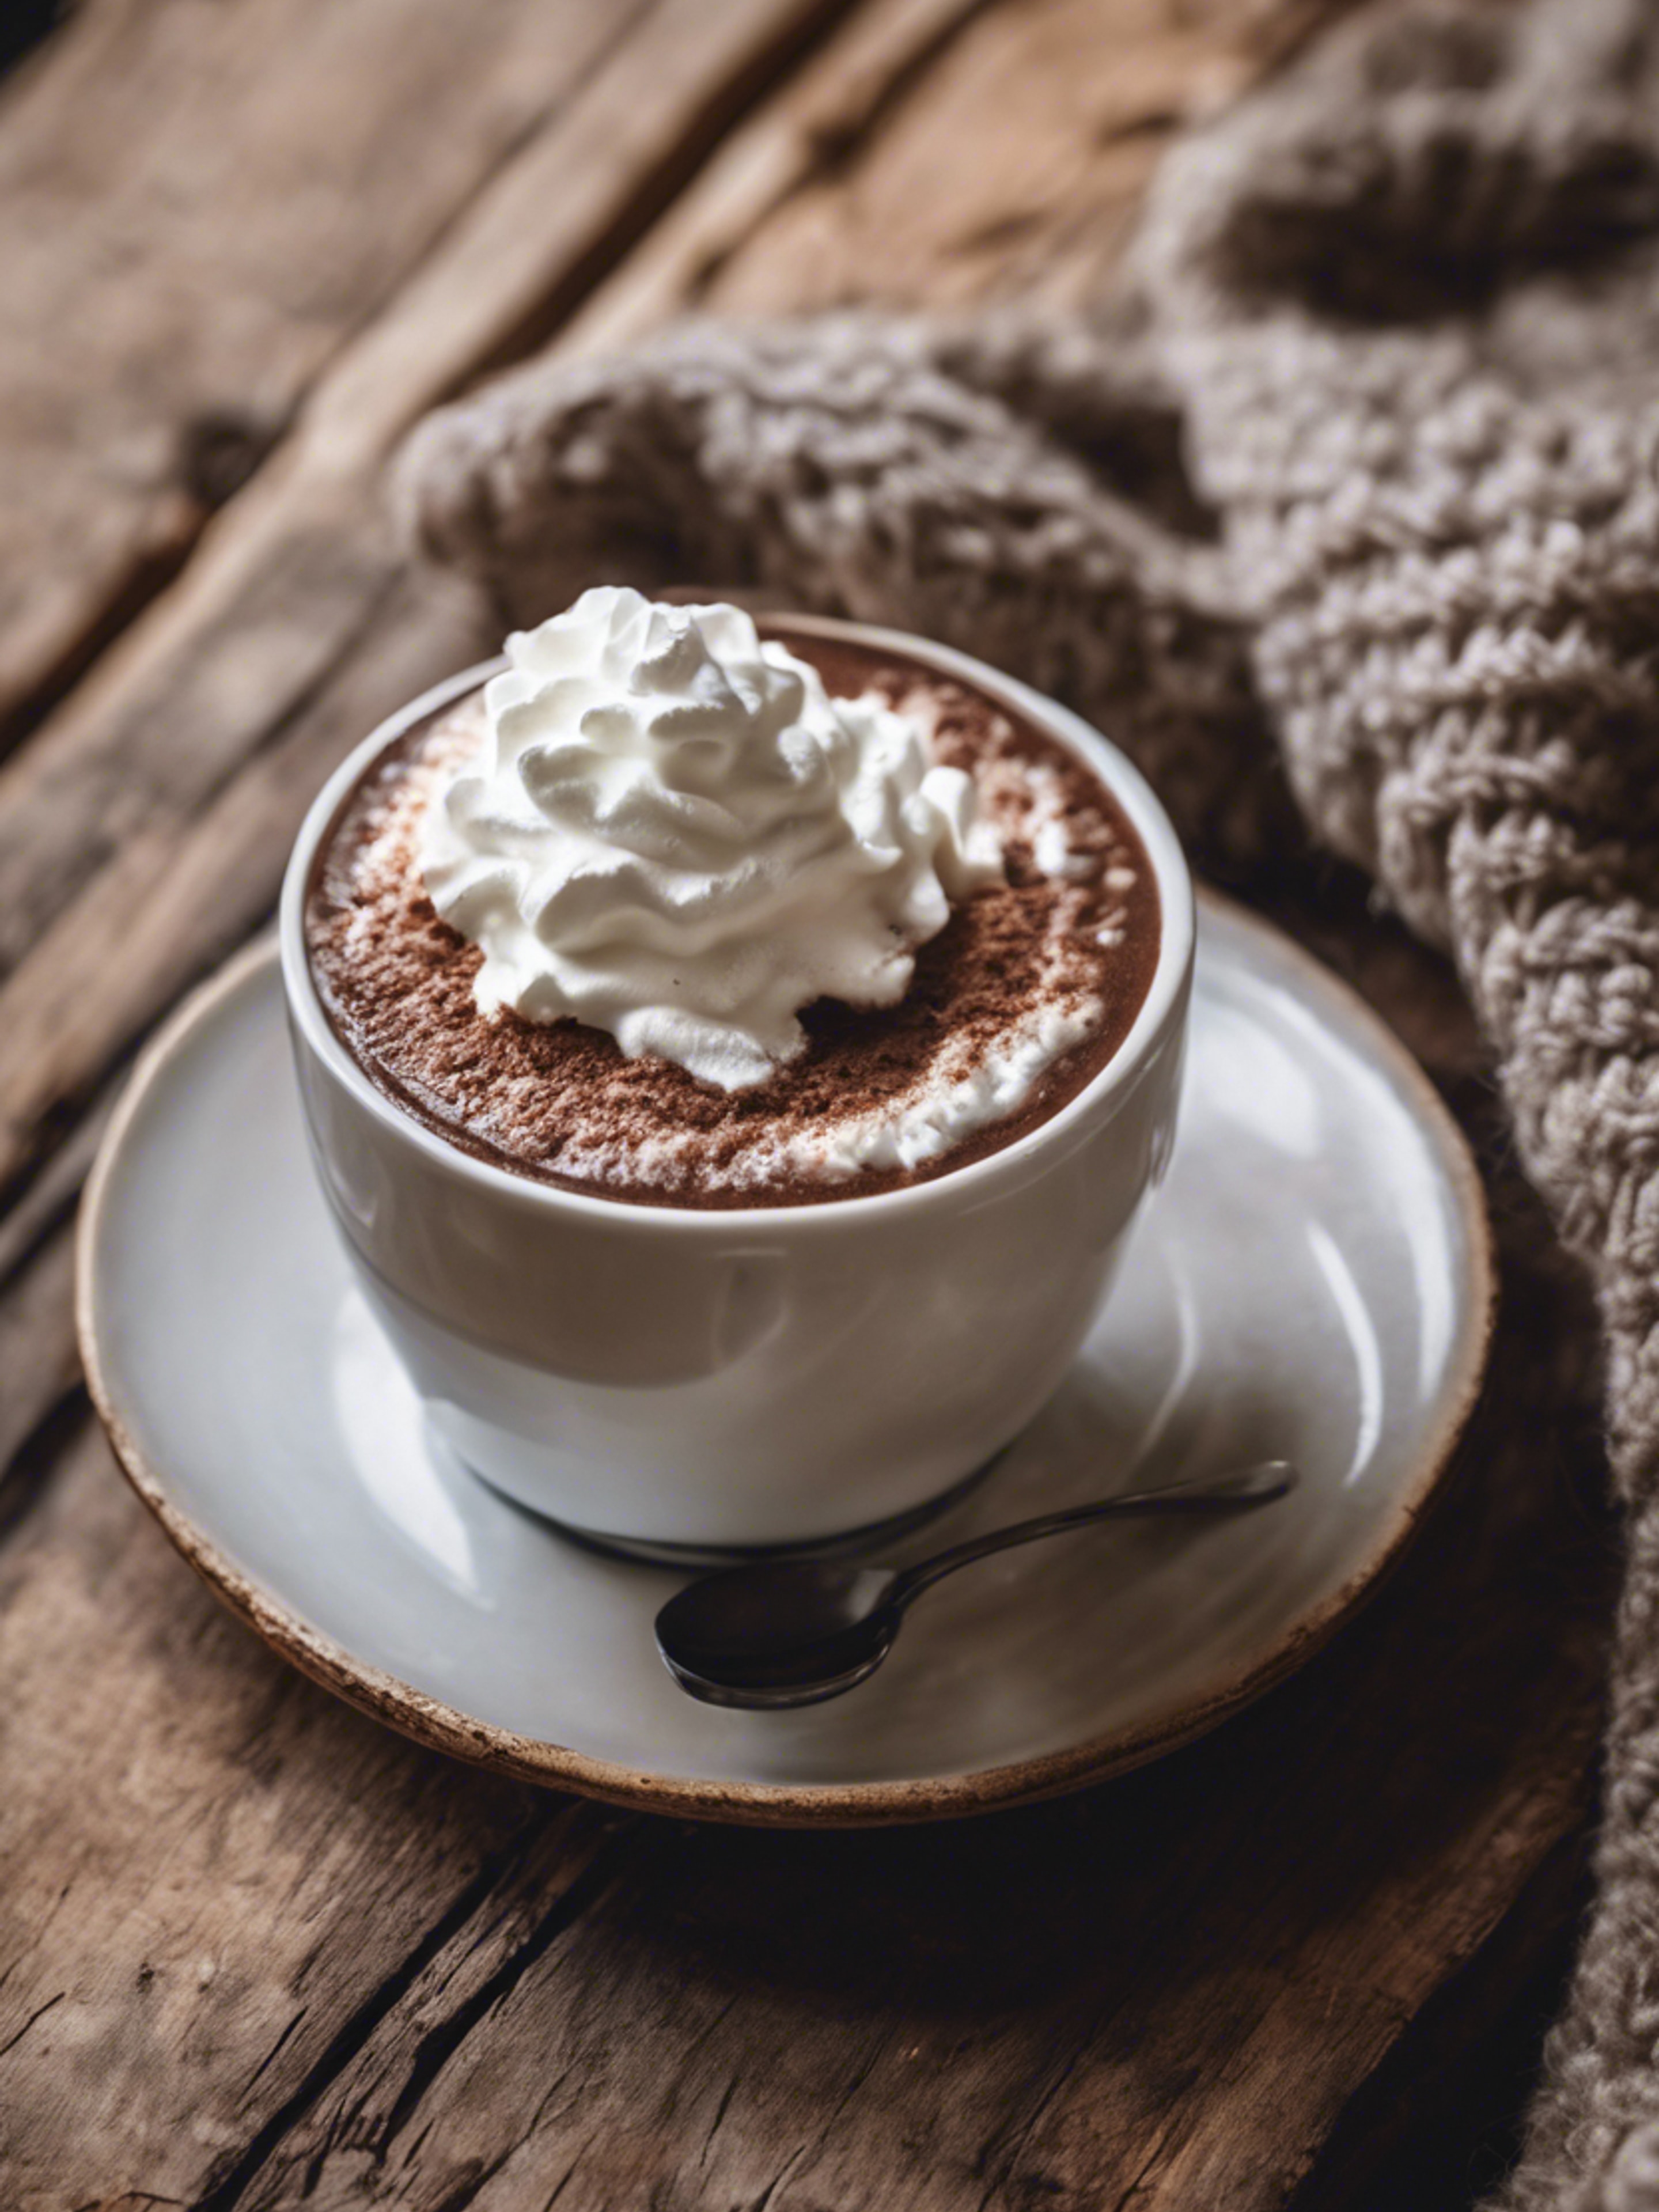 A porcelain cup of steaming hot chocolate topped with whipped cream, next to a crochet coaster on a rough wooden table. Tapeta[f8ececc79cde48c88690]